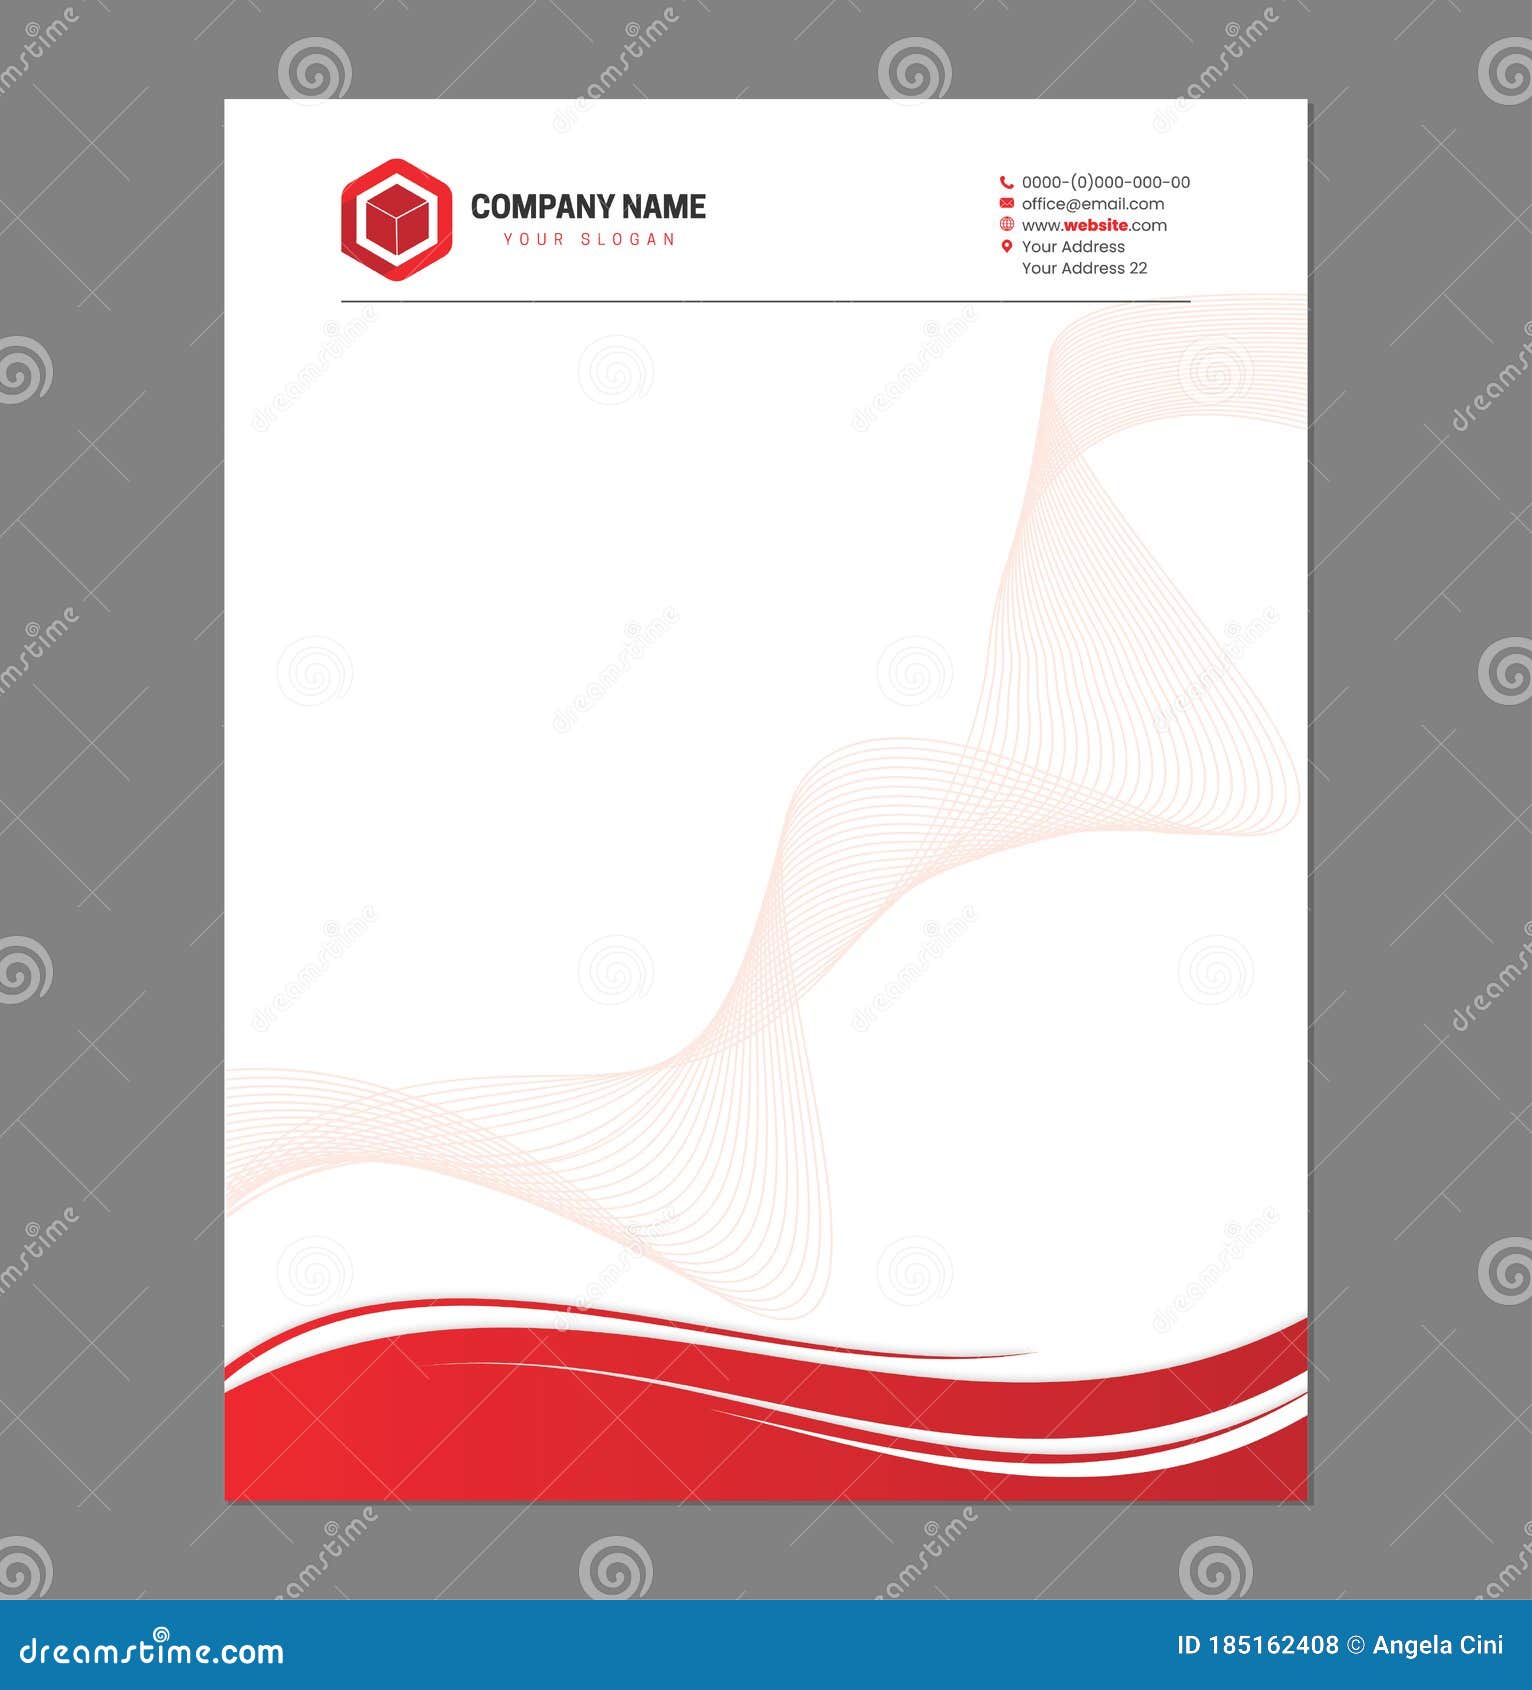 Red Business Letterhead Template for Print with Logo Stock Vector For Letterhead With Logo Template